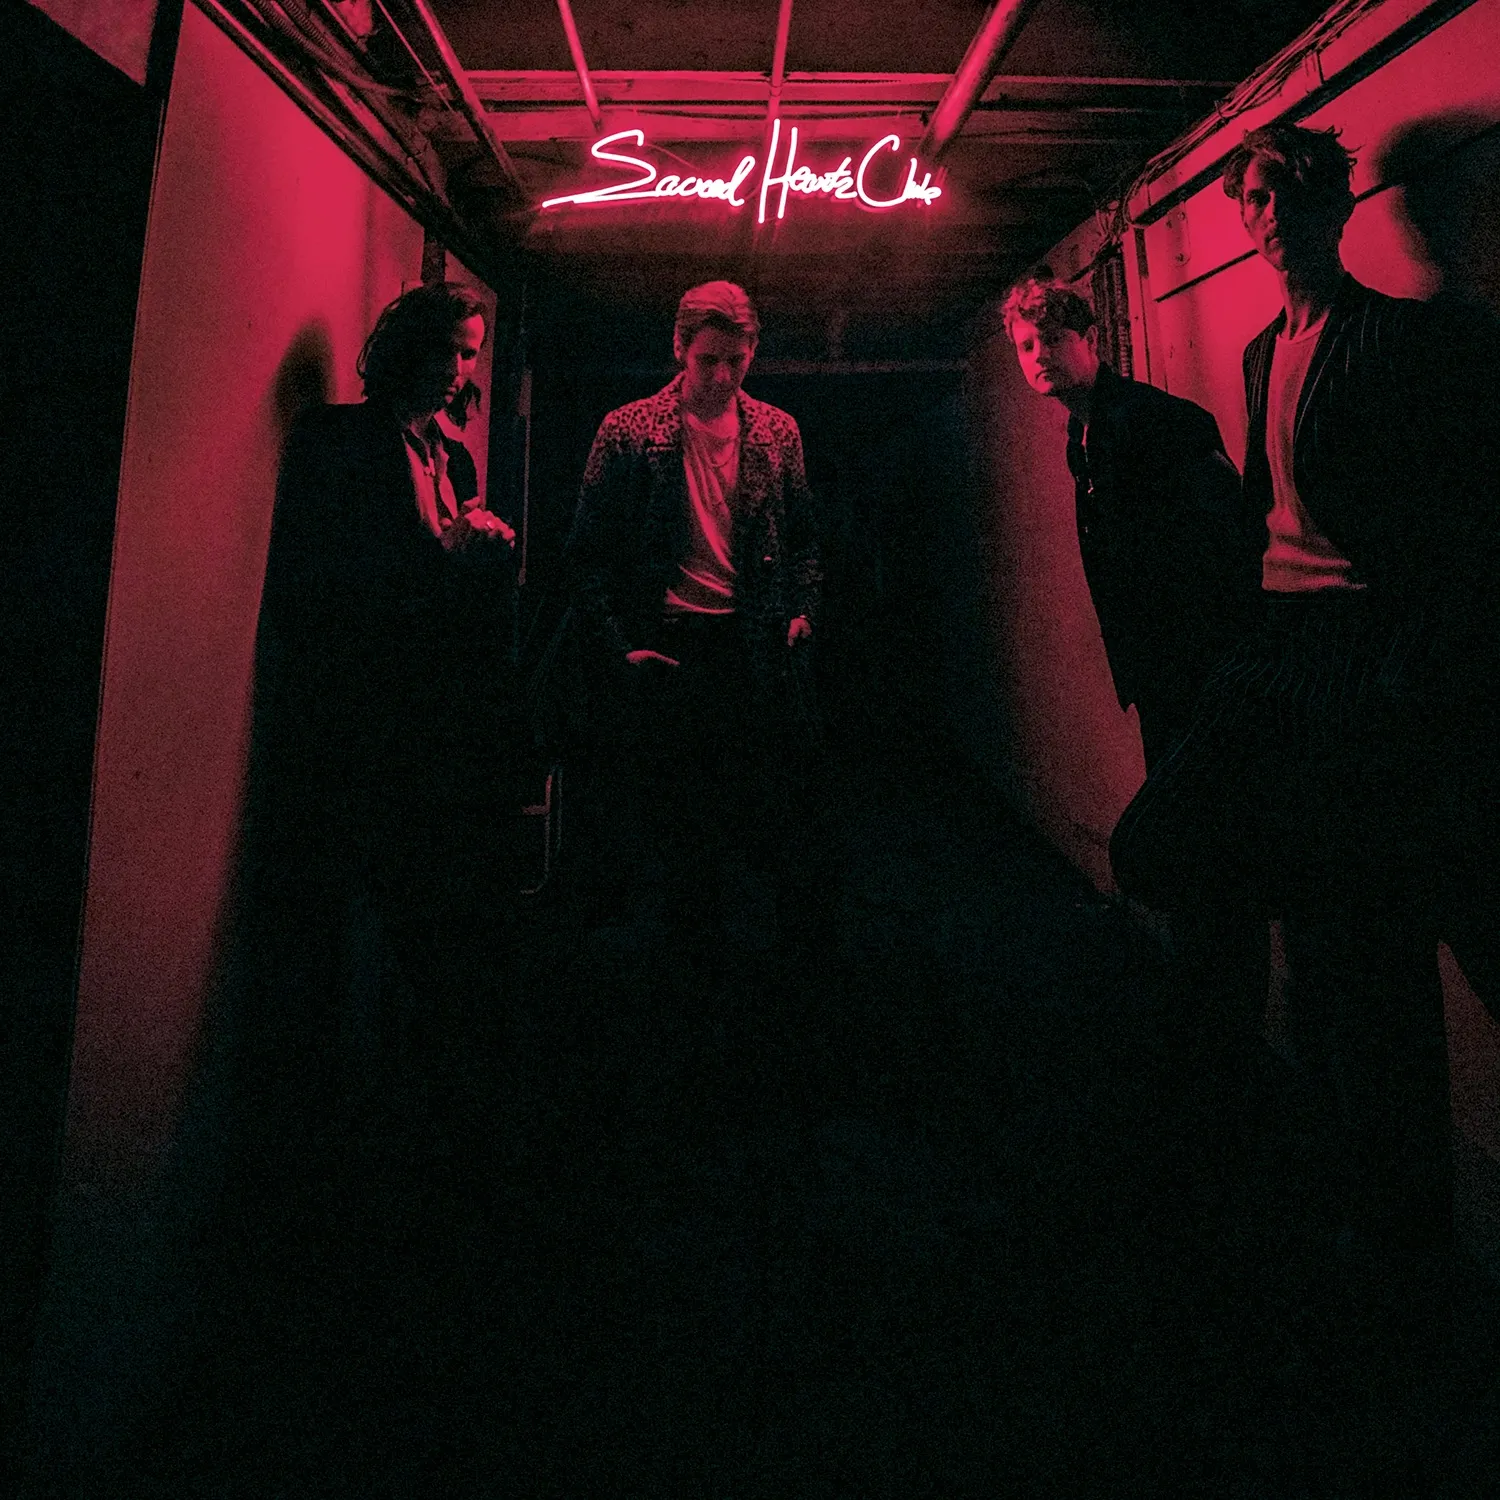 <strong>Foster The People - Sacred Hearts Club</strong> (Vinyl LP - black)